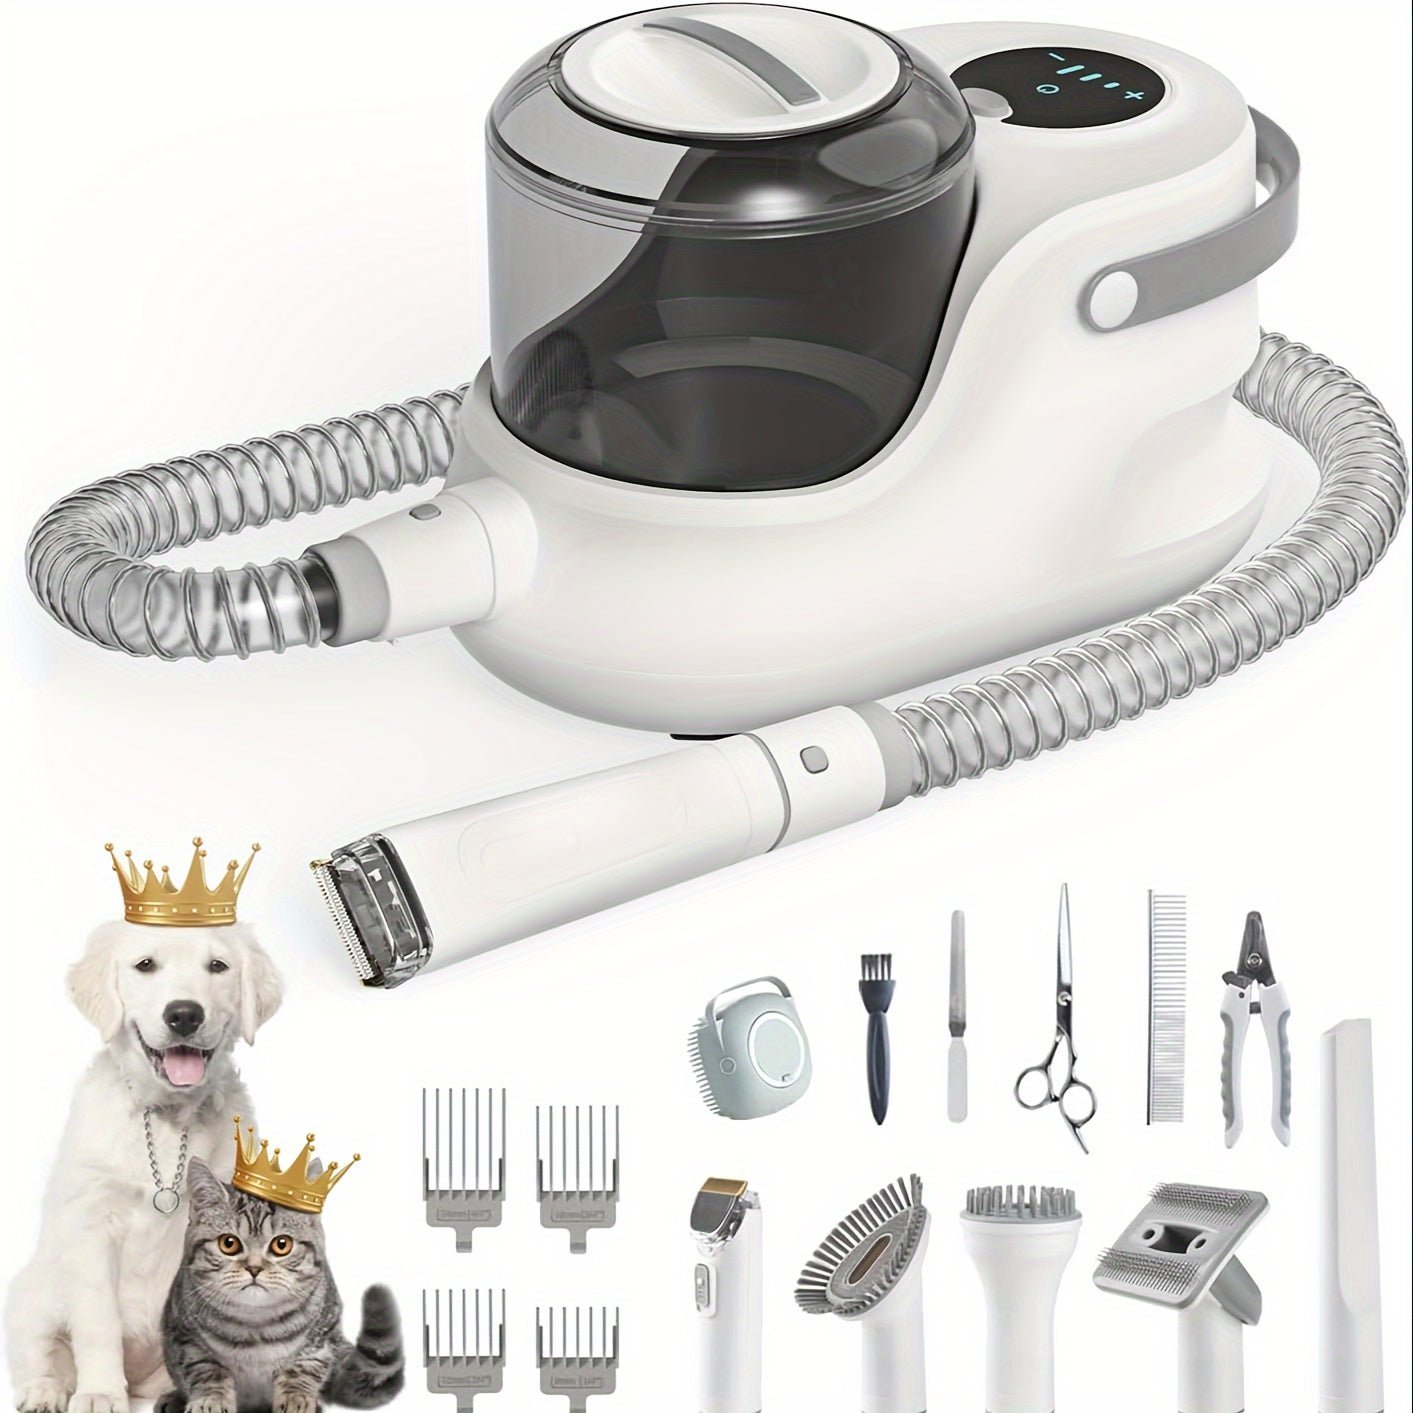 7 in 1 Professional Pet Grooming Kit with Vacuum Suction, Pro pet Grooming kit Pet Grooming, 2.5L Capacity Pet Hair Dust Cup - Ammpoure Wellbeing